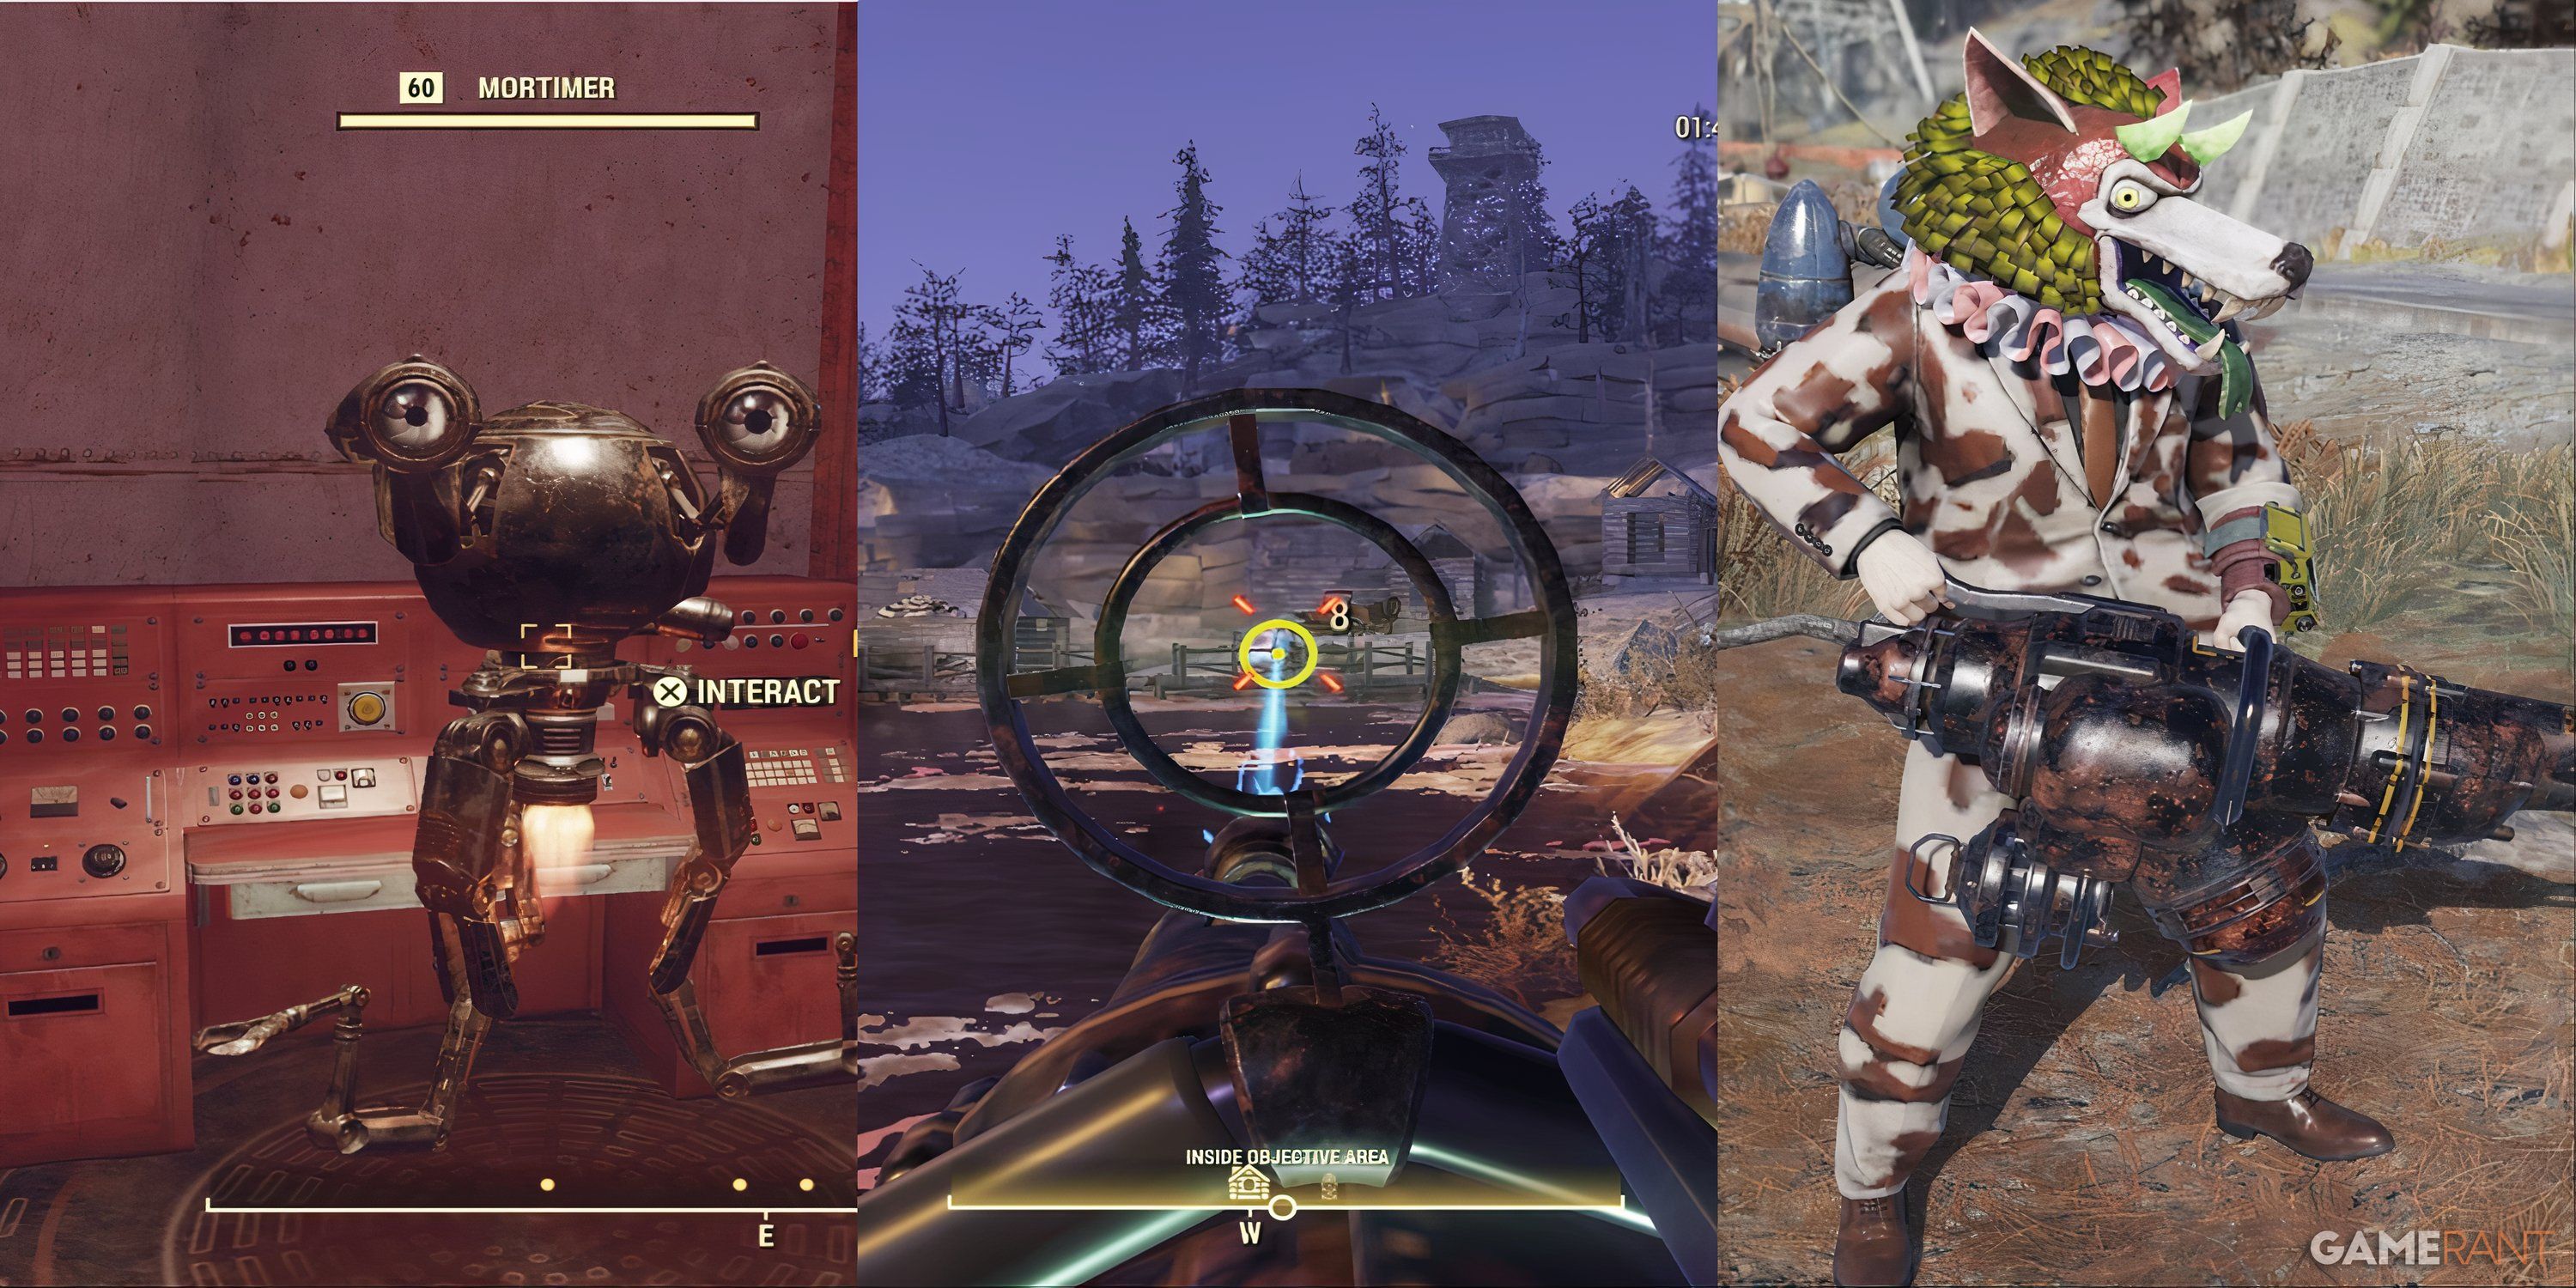 Mortimer And The Gauss Minigun in Fallout 76